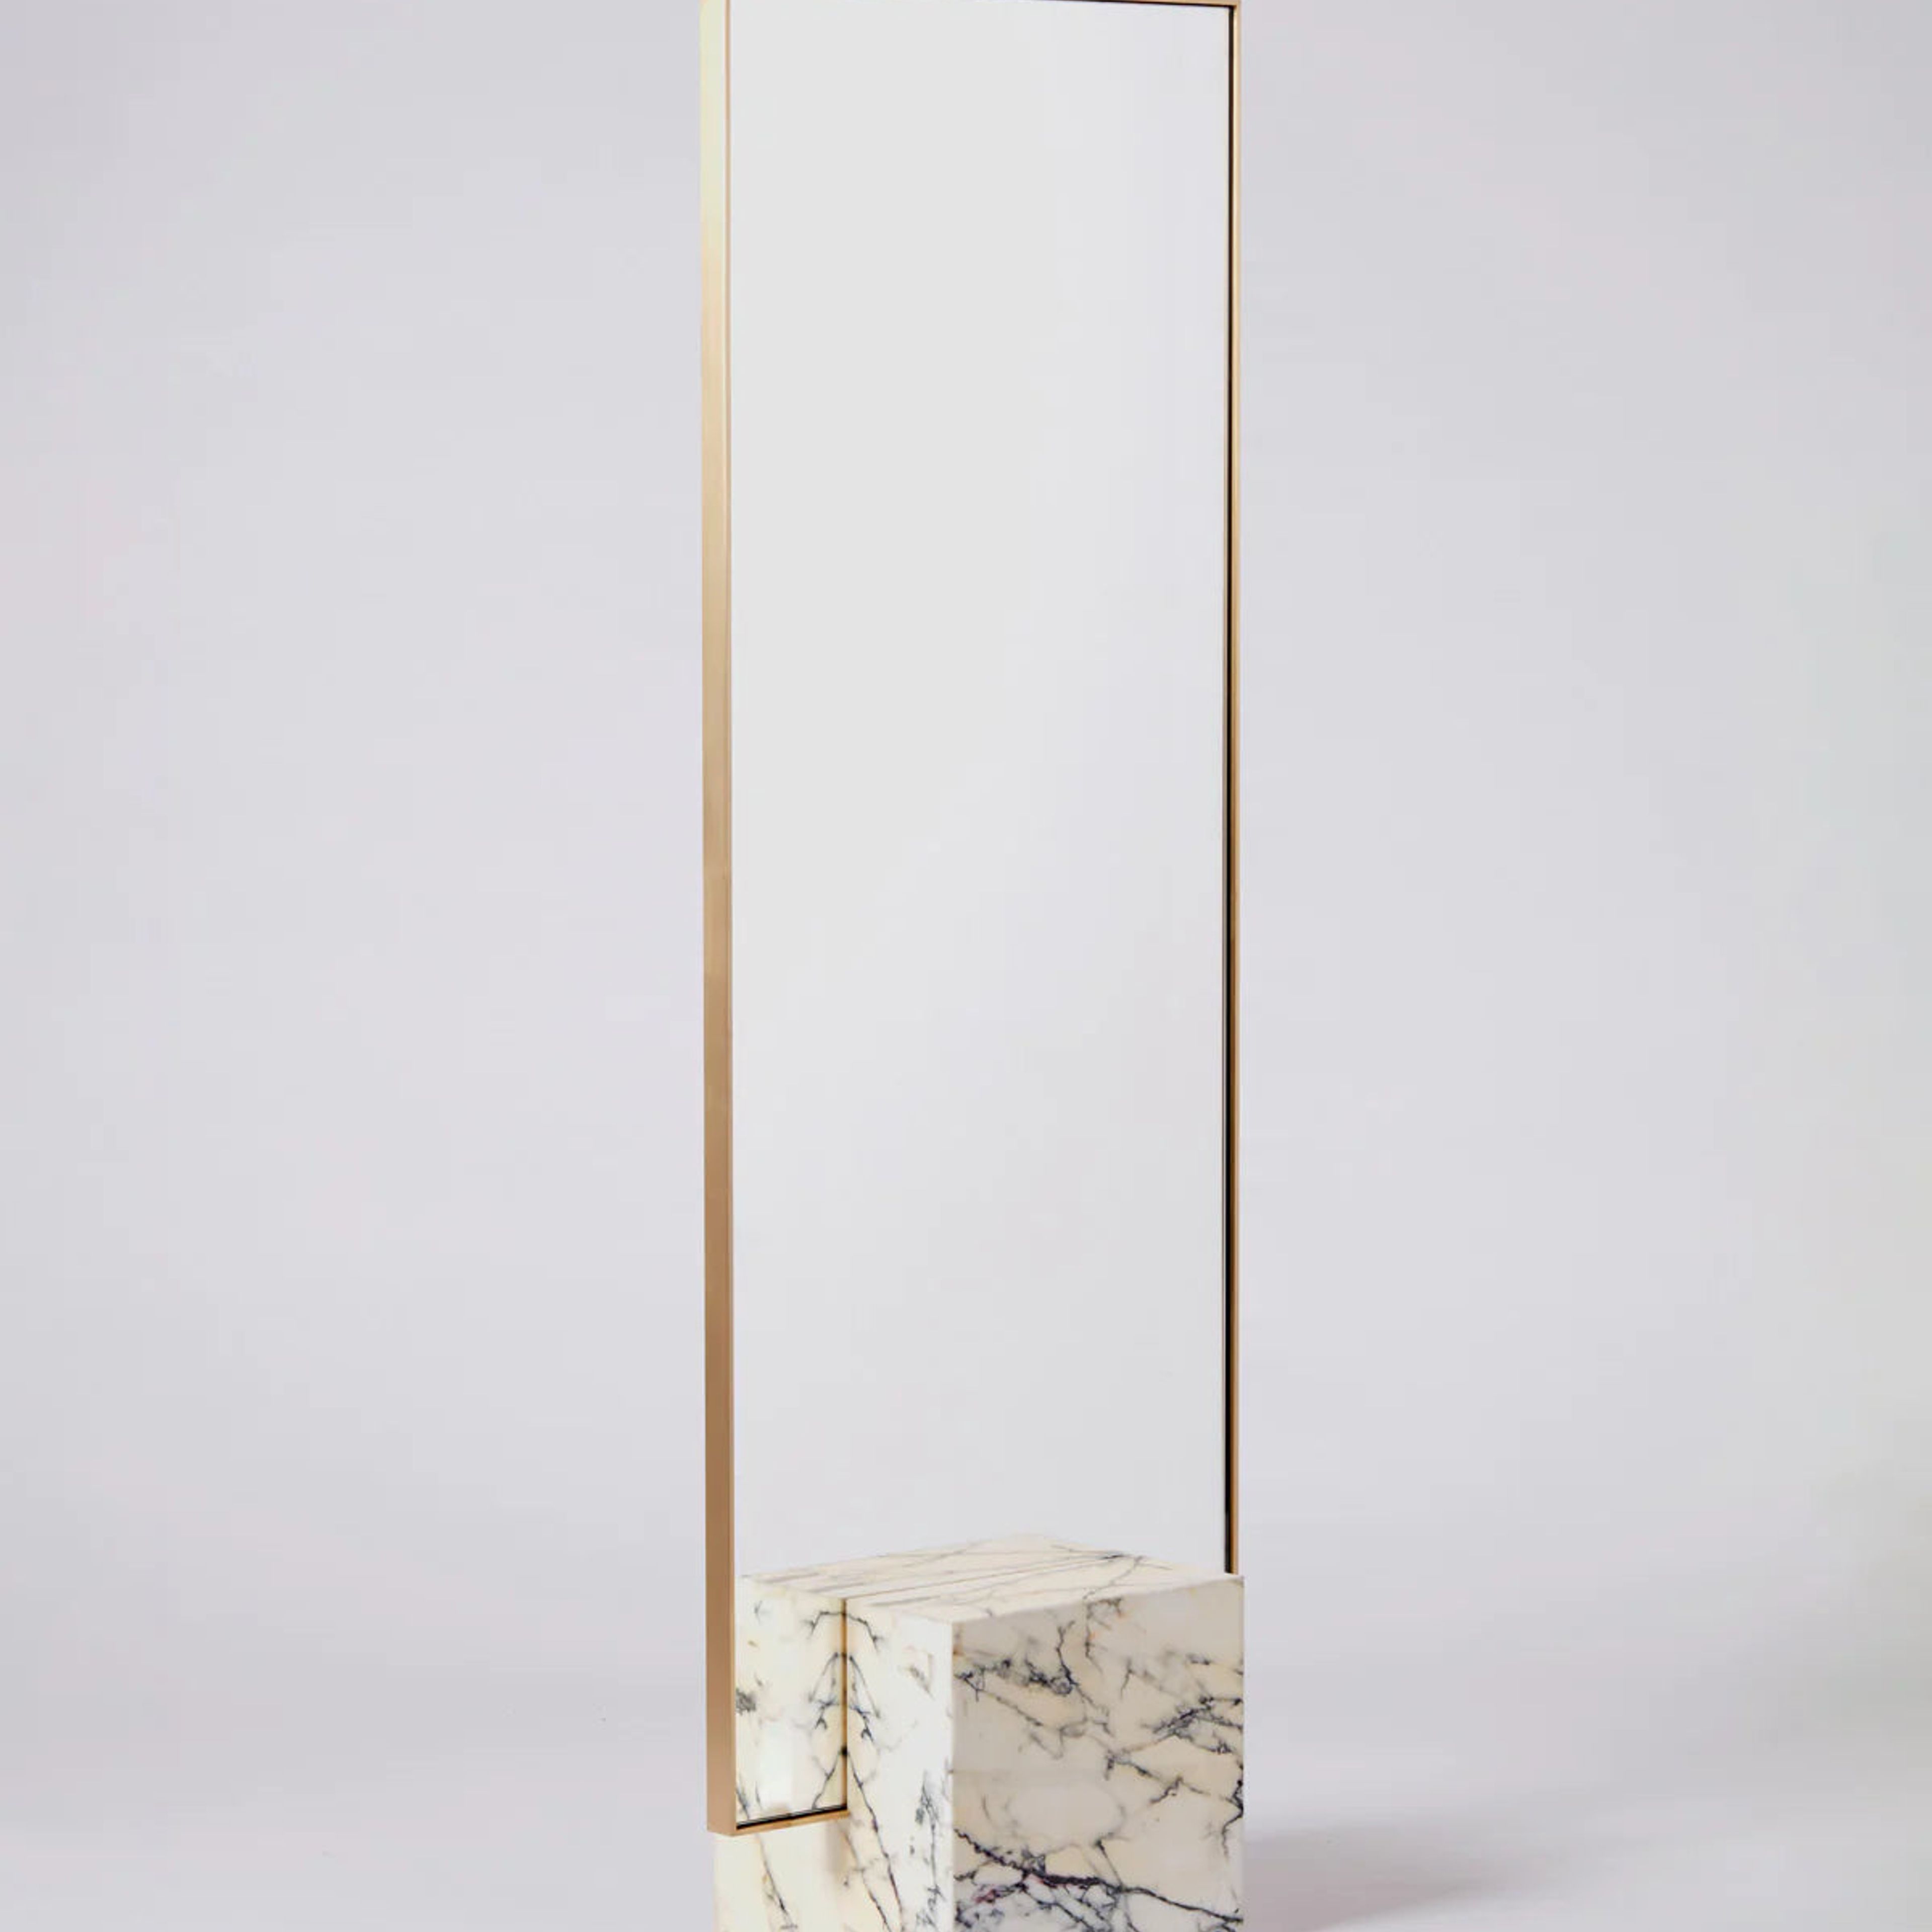 Coexist Standing Mirror by Slash Objects